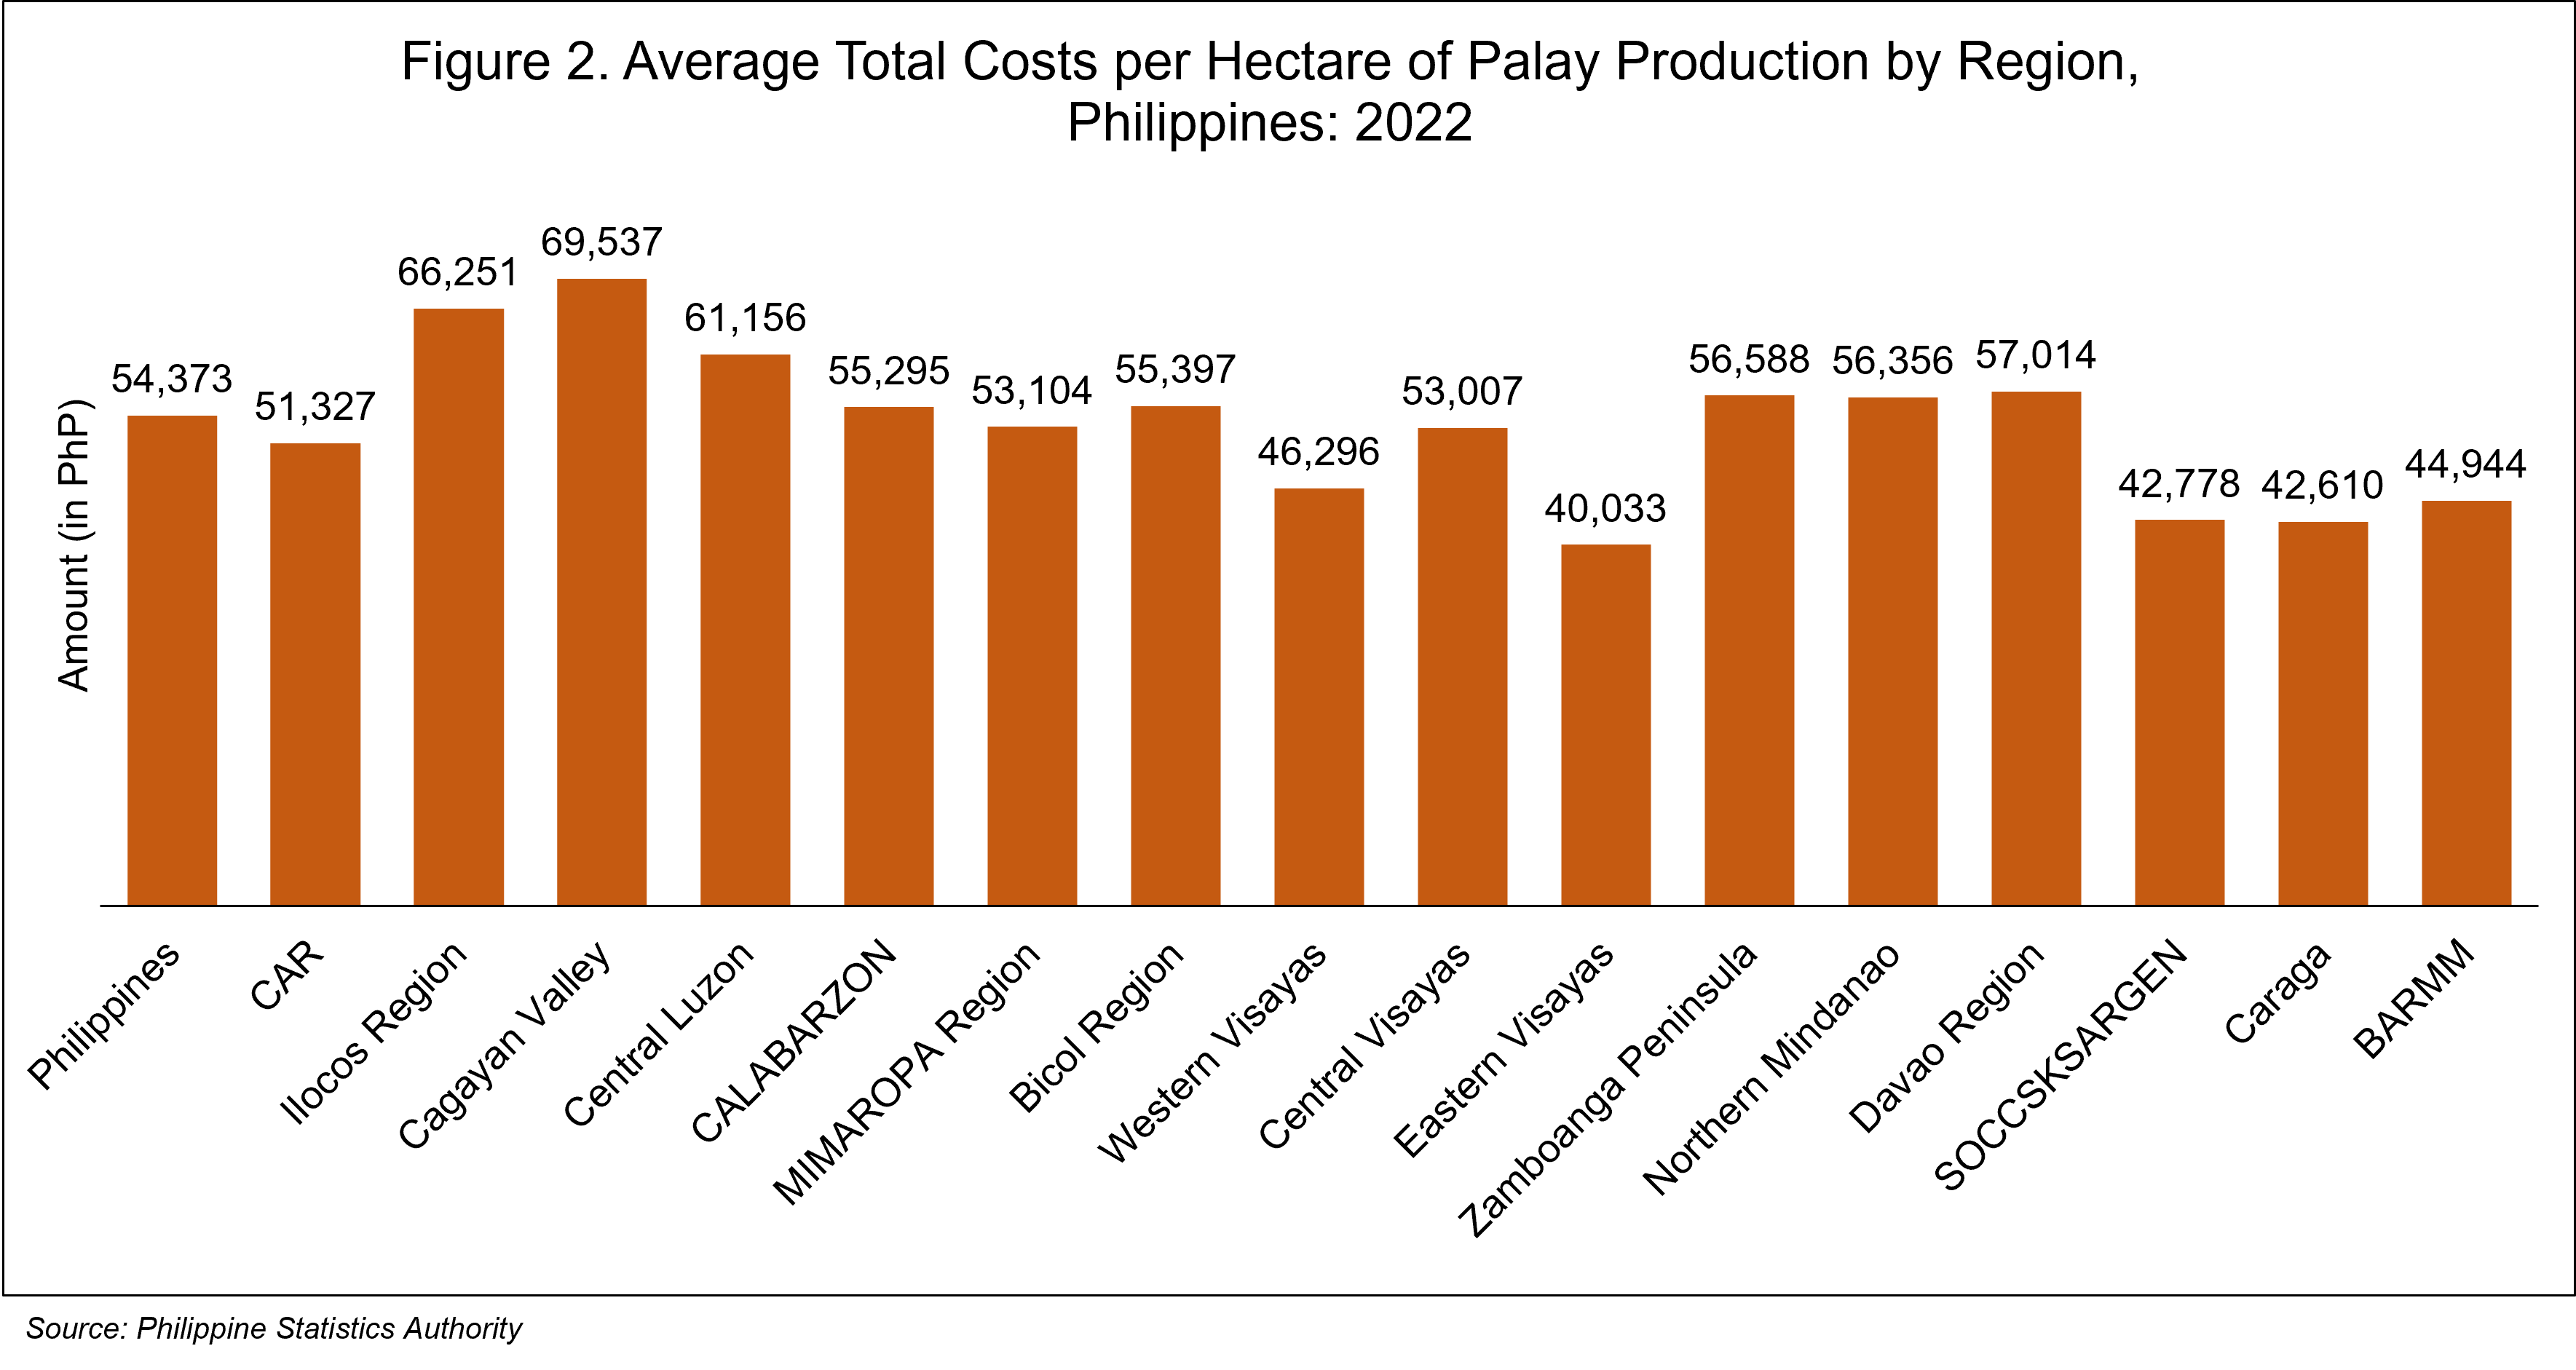 Average Total Costs per Hectare of Palay Production by Region